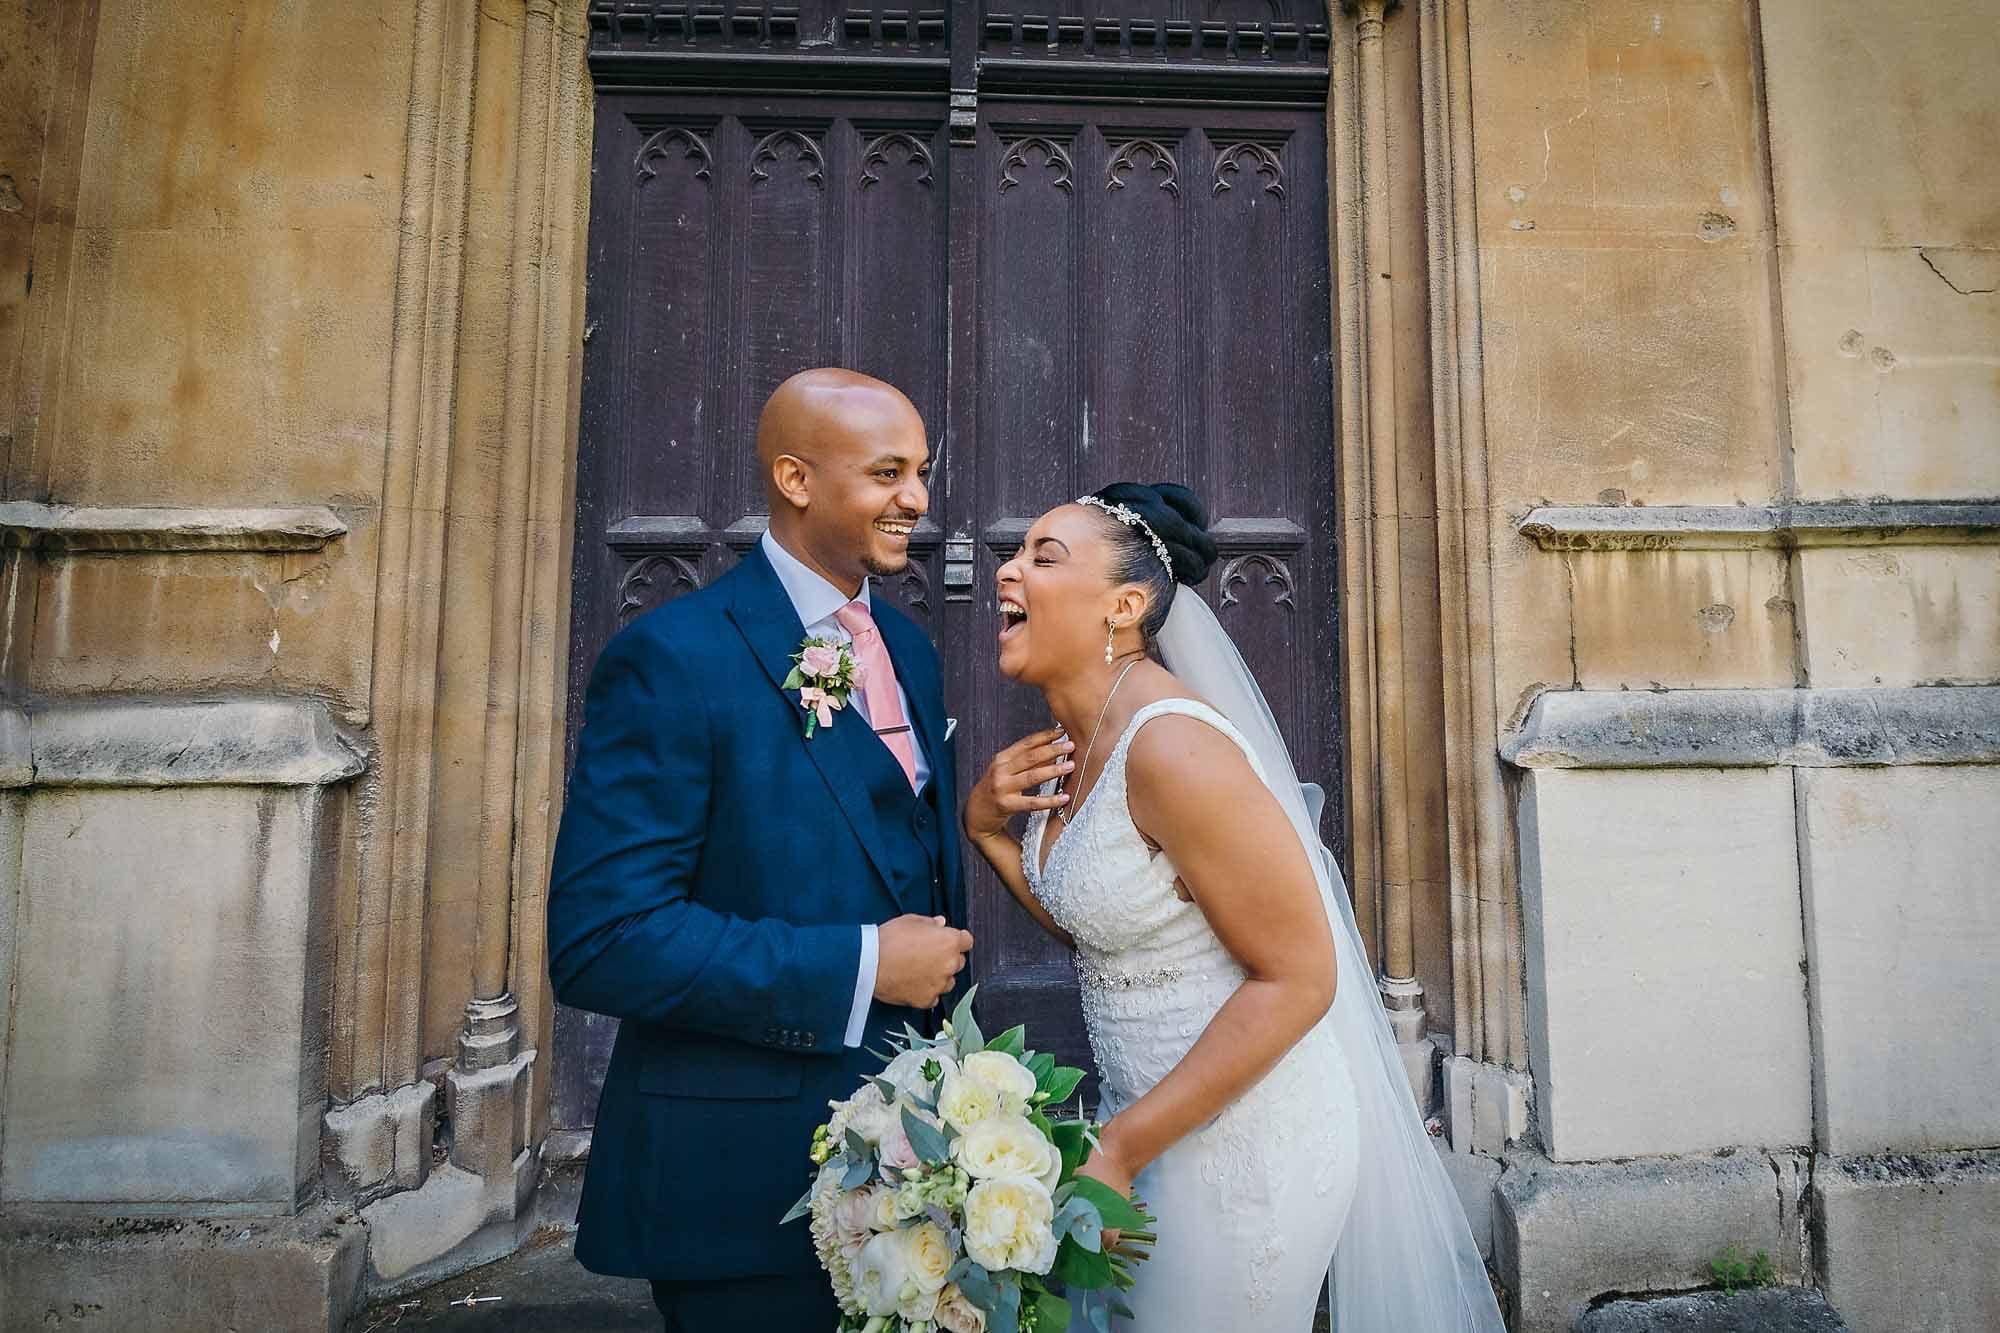 Bride and groom laughing together outside St Luke's Church in Chelsea, London